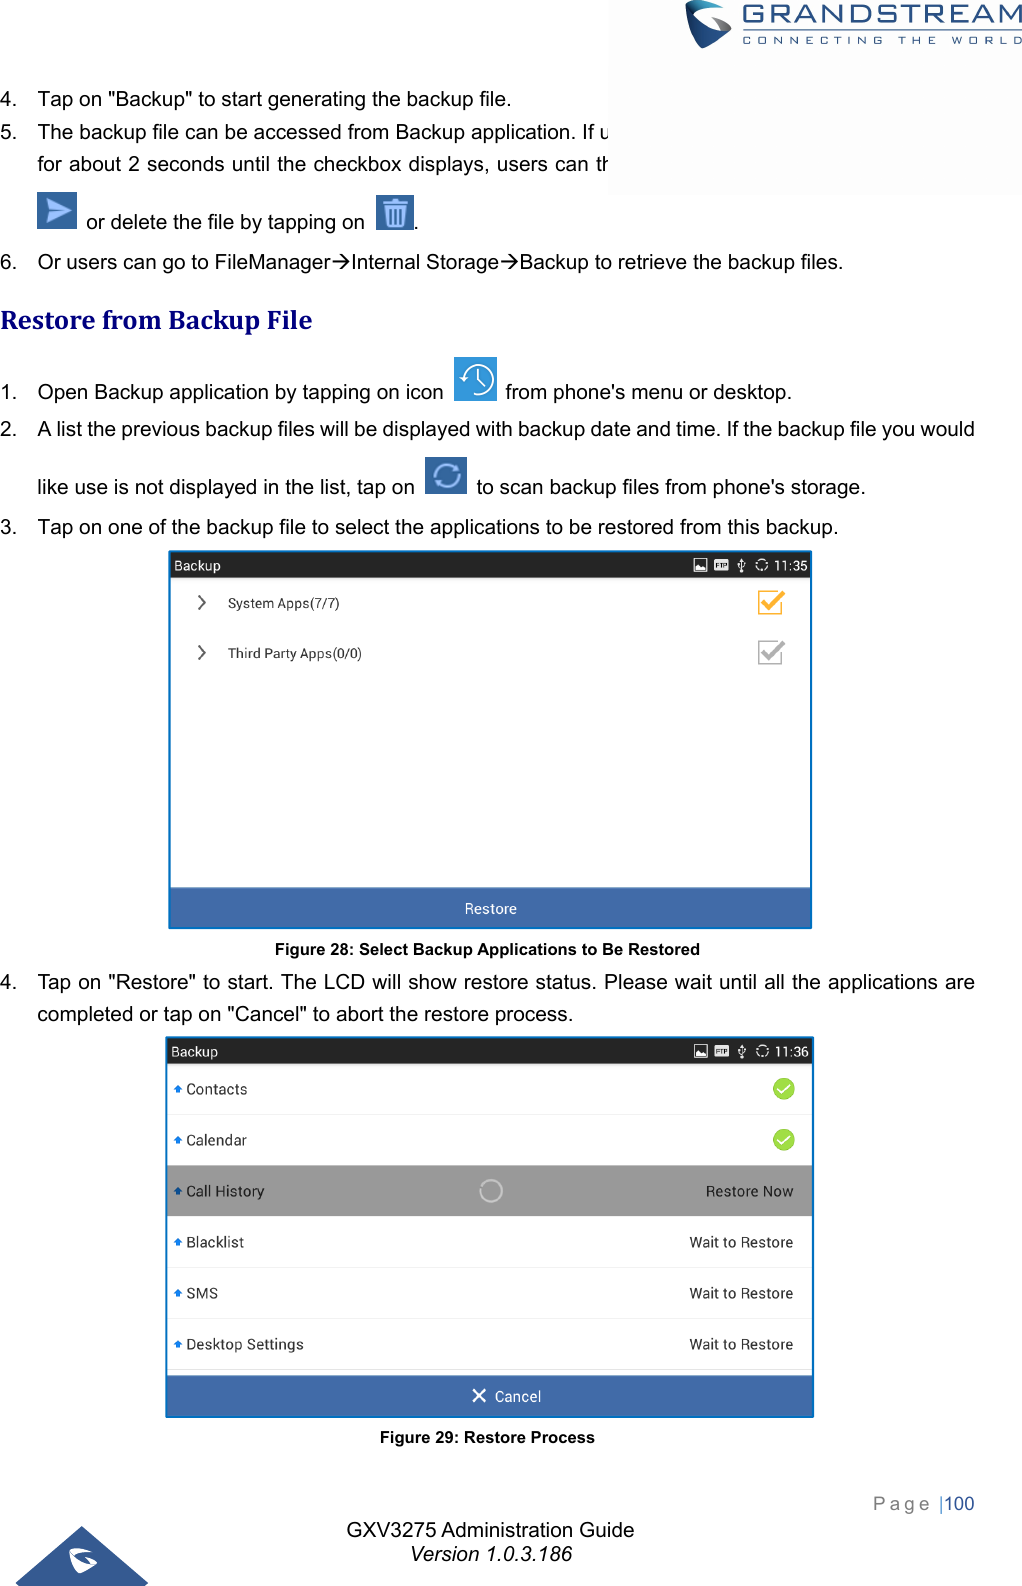 GXV3275 Administration Guide Version 1.0.3.186 Page |100  4.  Tap on &quot;Backup&quot; to start generating the backup file. 5.  The backup file can be accessed from Backup application. If users touch and press on the backup file for about 2 seconds until the checkbox displays, users can then share the backup file by tapping on   or delete the file by tapping on  . 6.  Or users can go to FileManagerInternal StorageBackup to retrieve the backup files. RestorefromBackupFile1.  Open Backup application by tapping on icon    from phone&apos;s menu or desktop. 2.  A list the previous backup files will be displayed with backup date and time. If the backup file you would like use is not displayed in the list, tap on    to scan backup files from phone&apos;s storage. 3.  Tap on one of the backup file to select the applications to be restored from this backup.  Figure 28: Select Backup Applications to Be Restored 4.  Tap on &quot;Restore&quot; to start. The LCD will show restore status. Please wait until all the applications are completed or tap on &quot;Cancel&quot; to abort the restore process.  Figure 29: Restore Process 